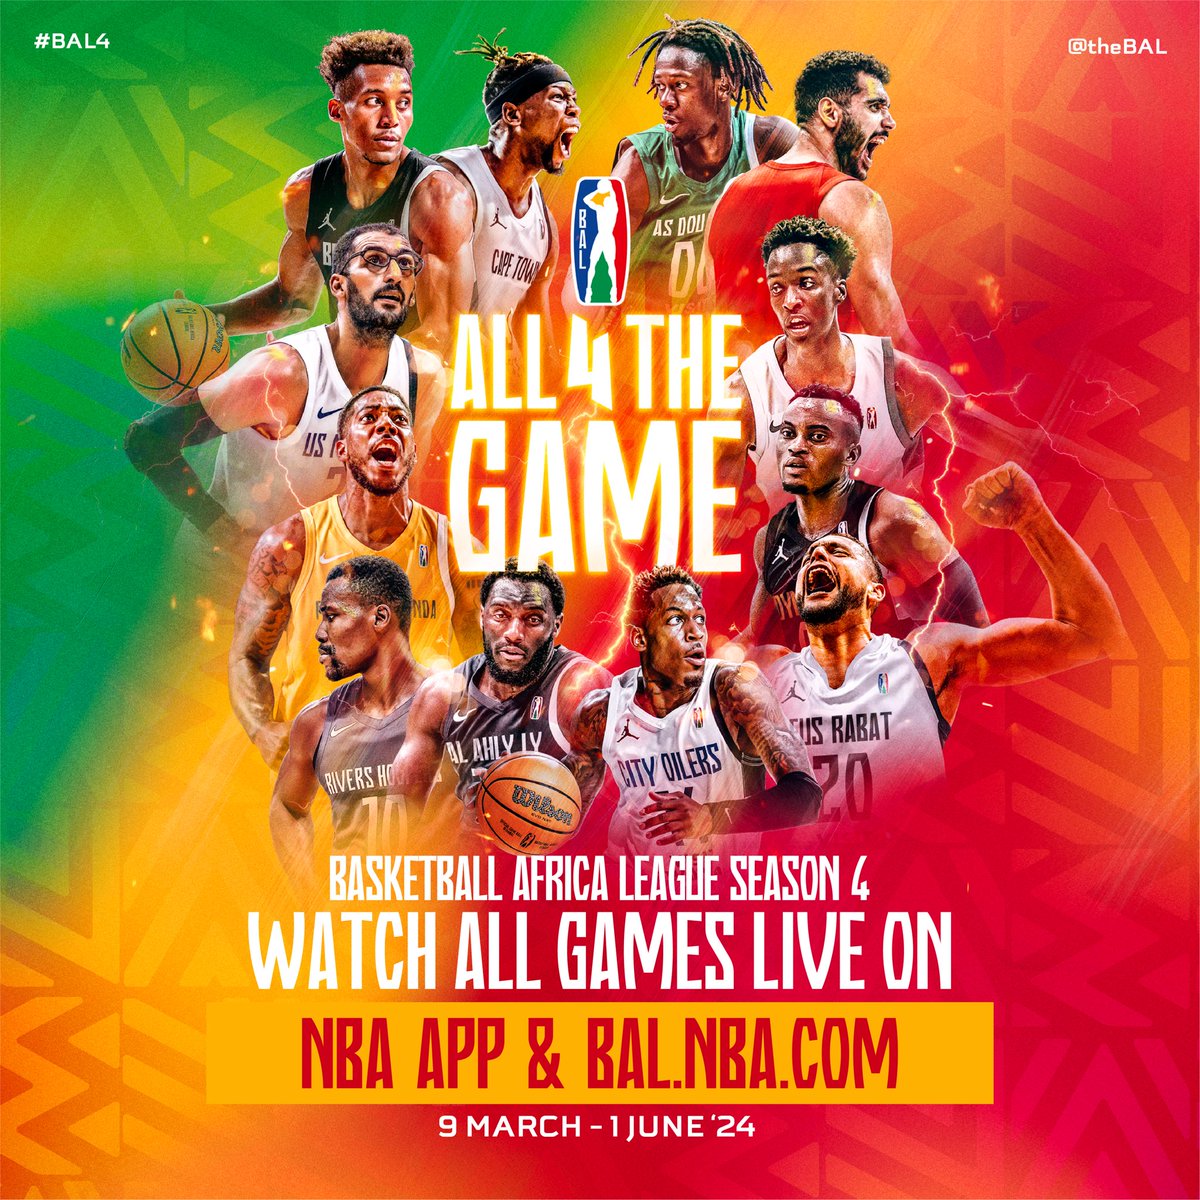 🌍🏀👑 The quest for Africa’s most coveted basketball crown starts on March 9th with Season 4 of the Basketball Africa League! 📲 Watch all games live on the NBA App or at BAL.NBA.com